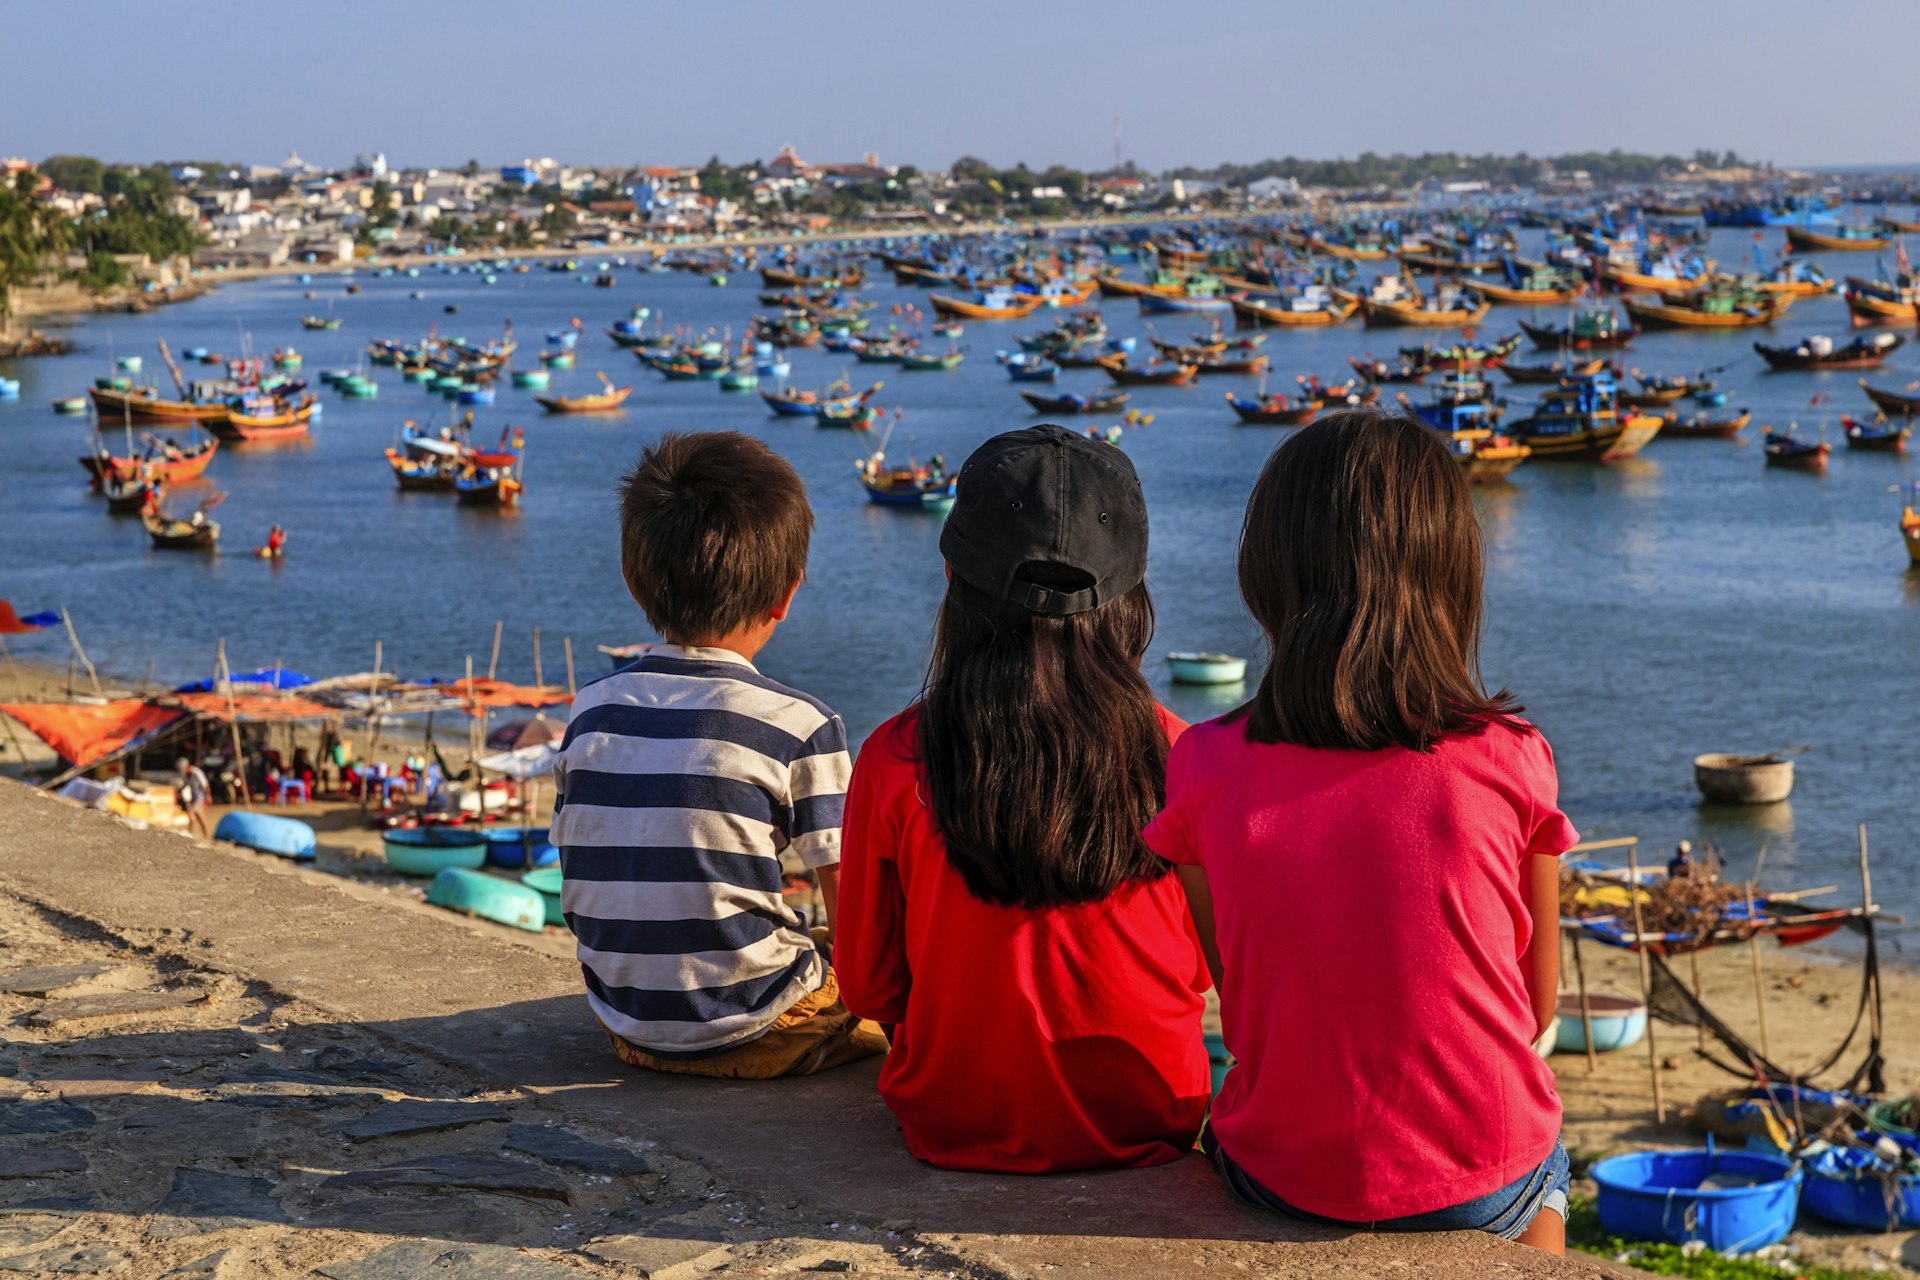 Three children sit on a wall looking out over a beach to the sea where many fishing boats have docked in the bay